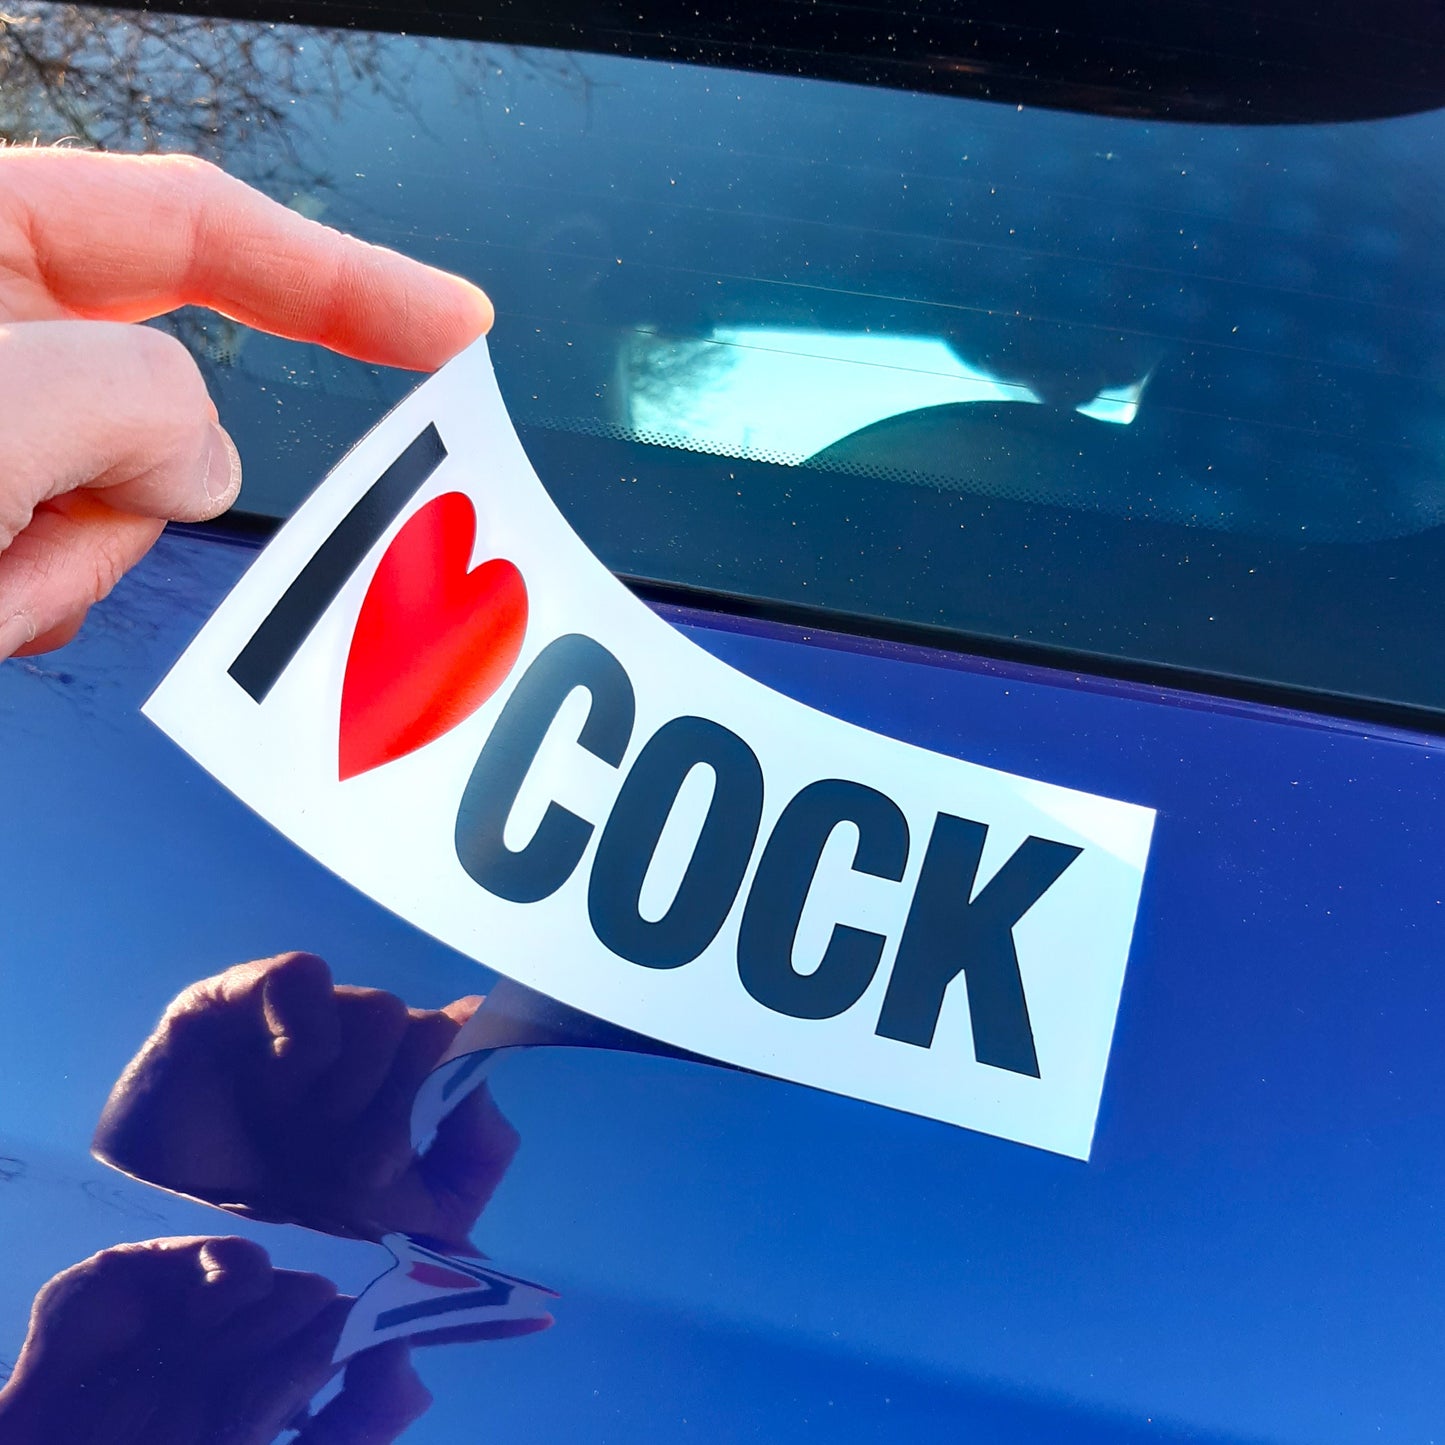 2 Joke Magnetic Car Stickers With "I LOVE COCK"